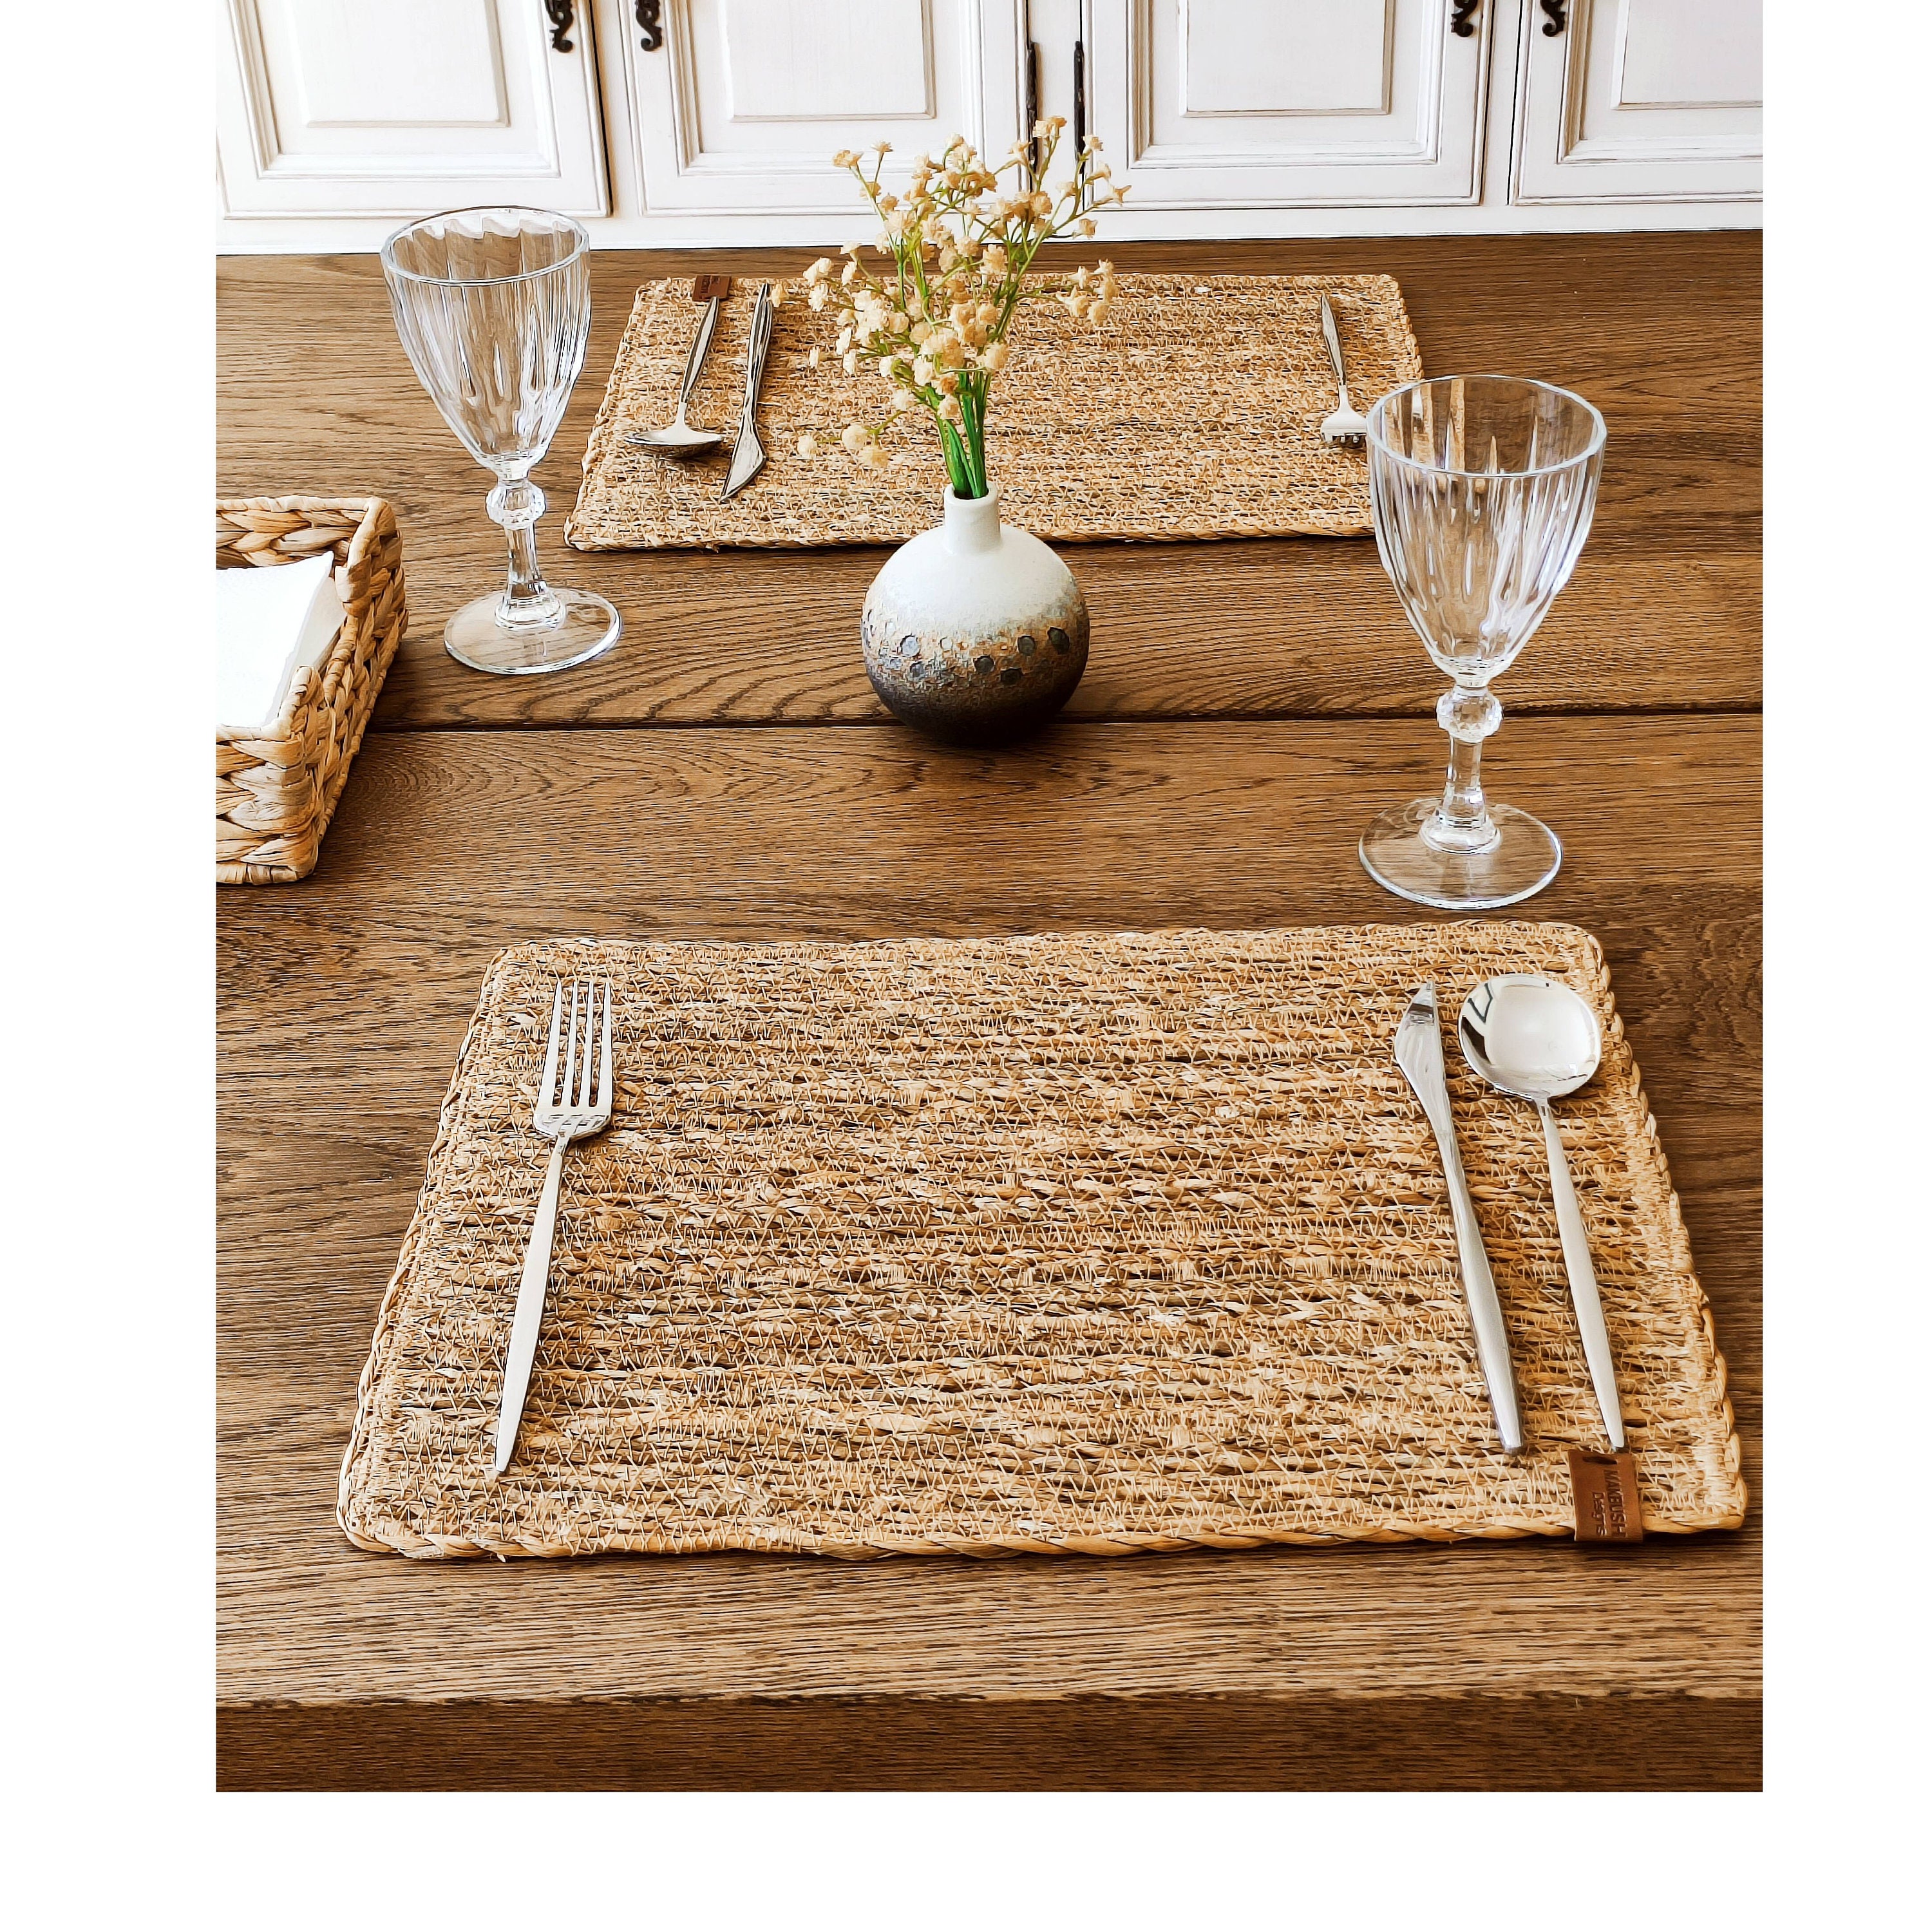  Placemats Set of 4 for Dining Table Décor, Woven Cloth